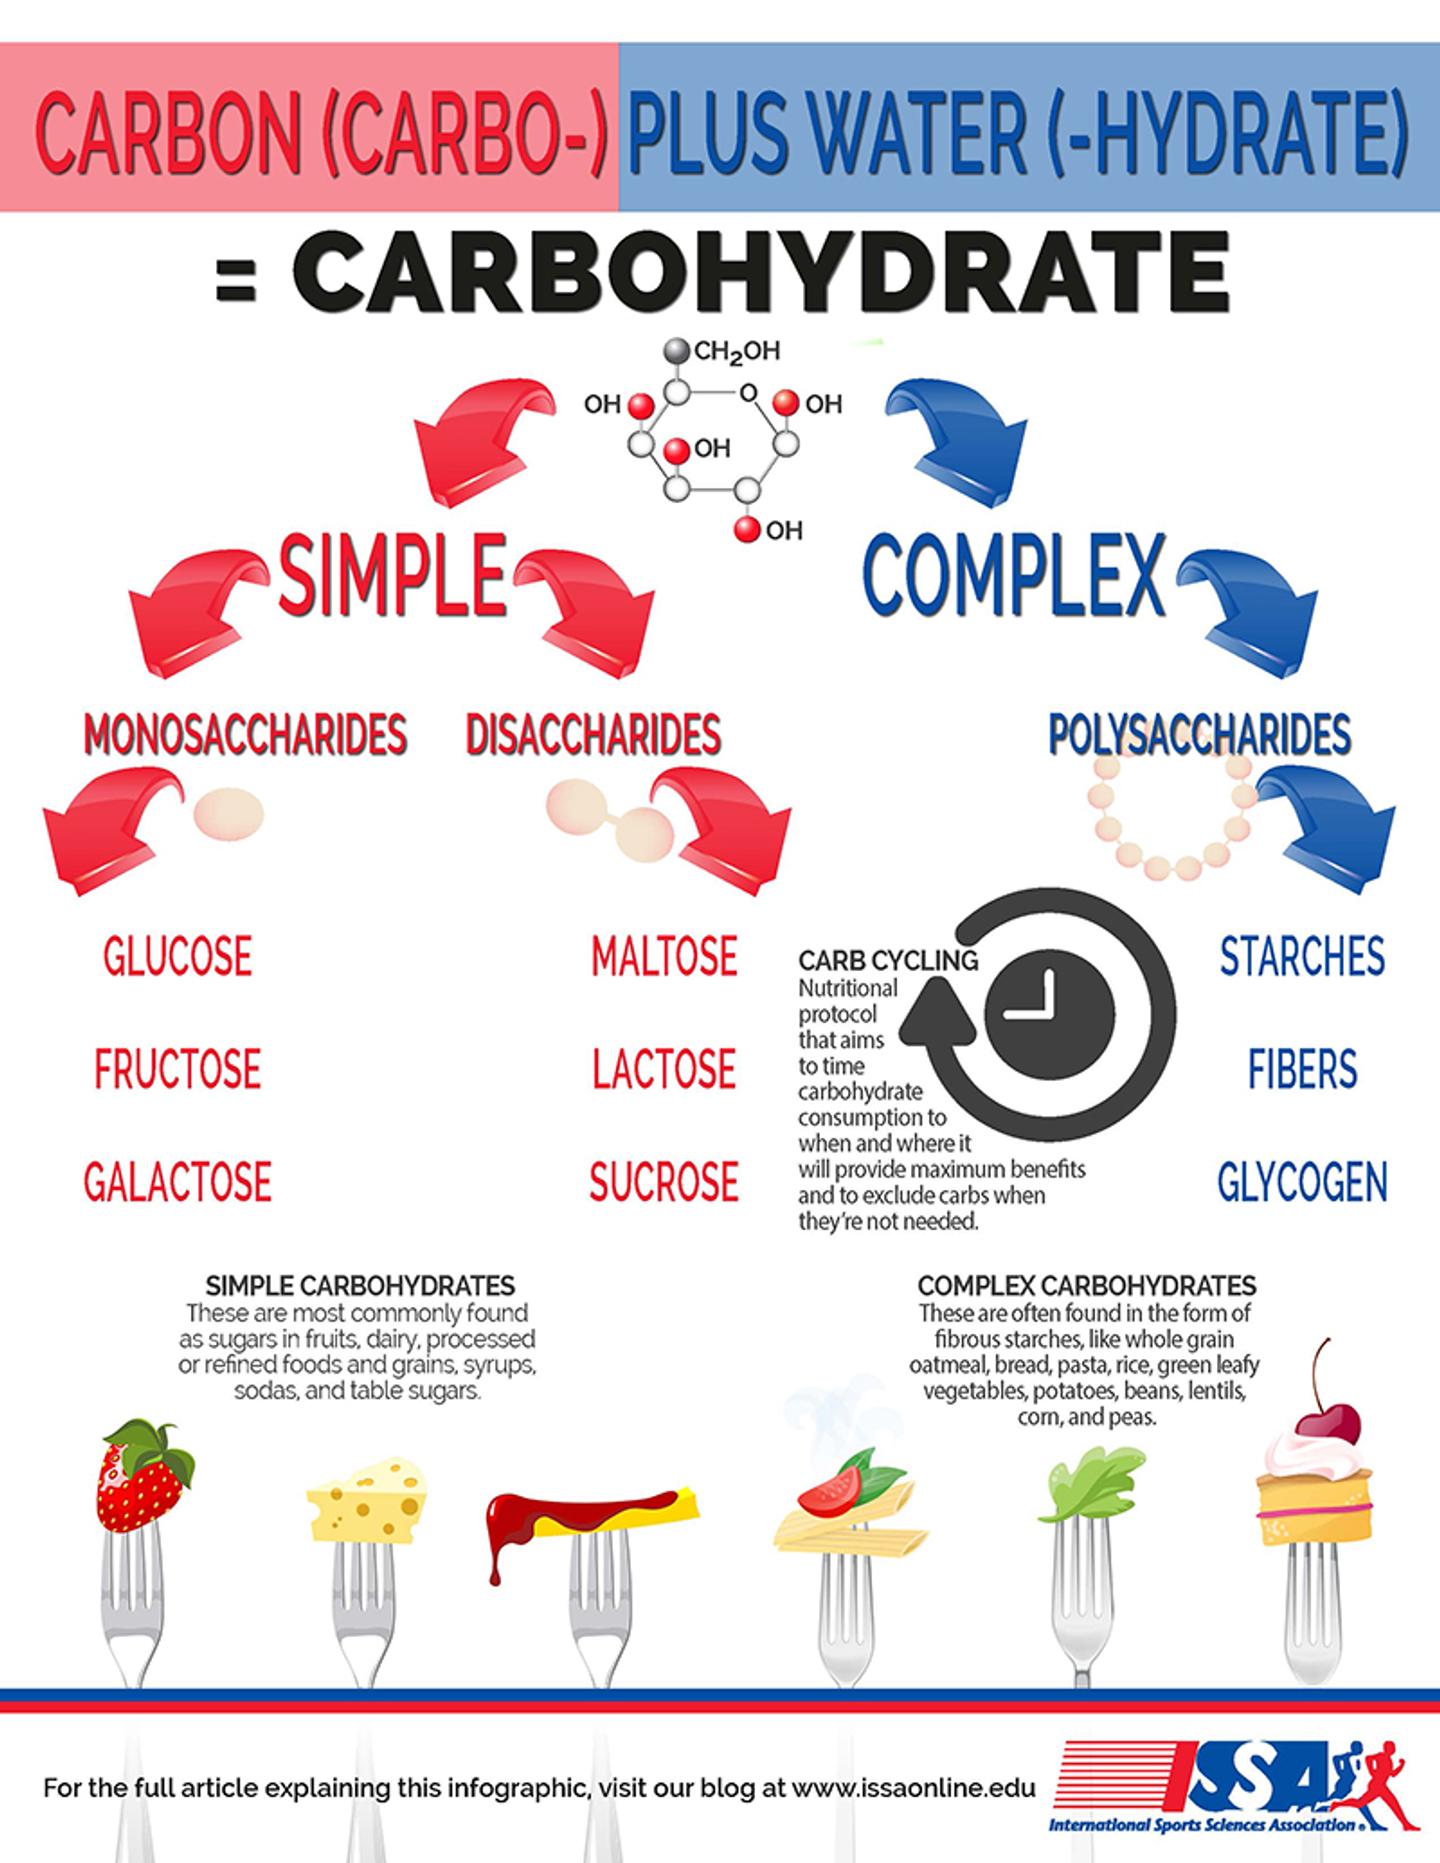 ISSA, International Sports Sciences Association, Certified Personal Trainer, ISSAonline, Use Science to Break Carbohydrate Fear, Carbs, What is Carbohydrate?